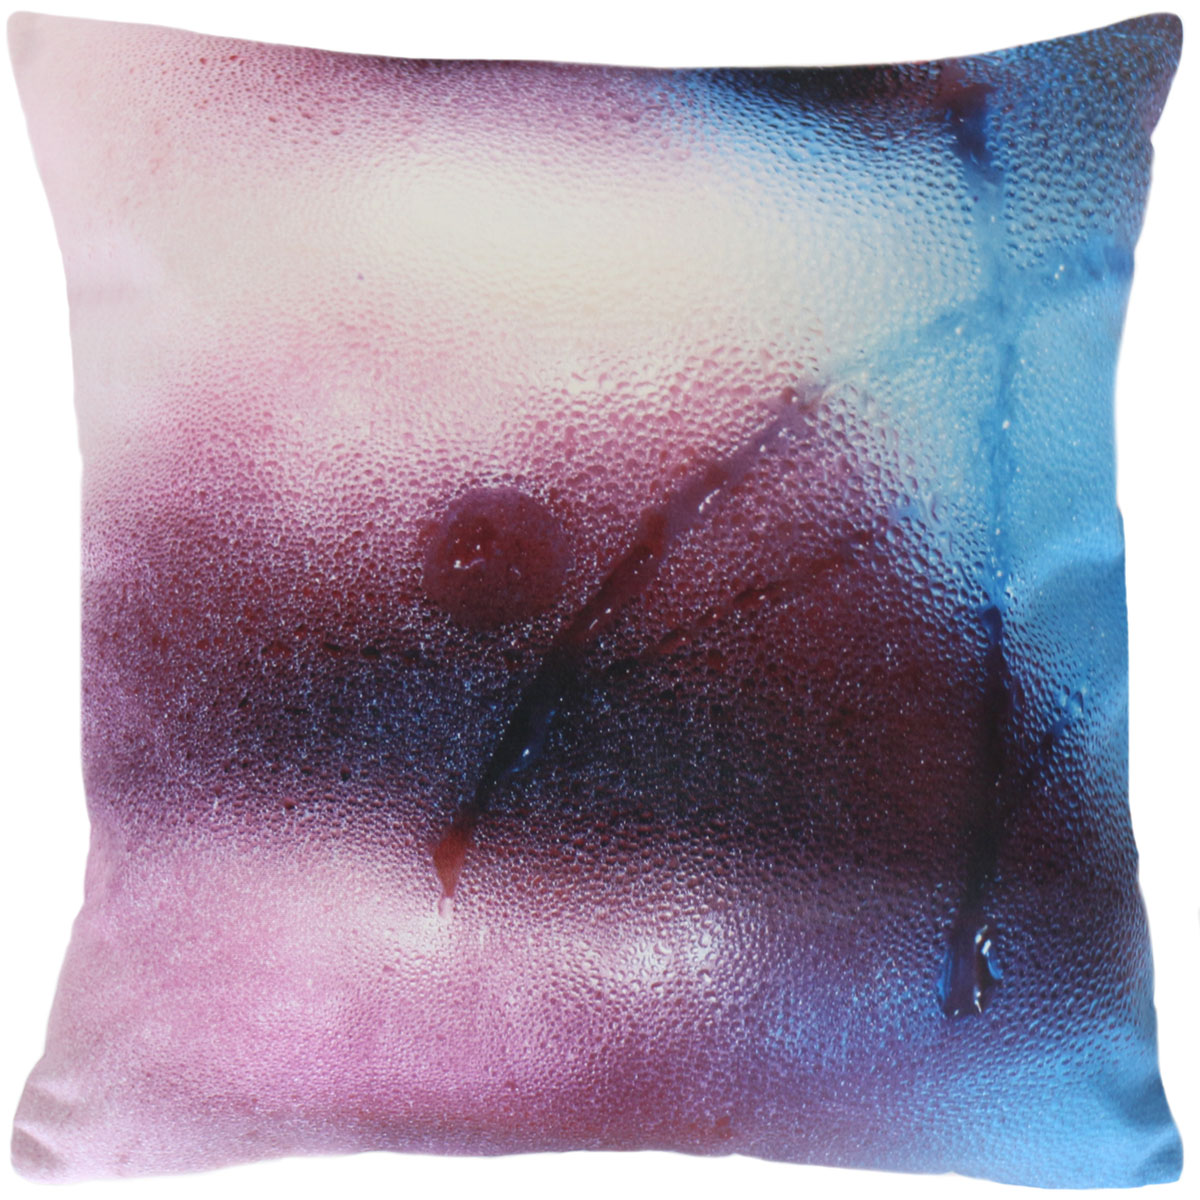 Product Image _Marilyn Minter | Untitled